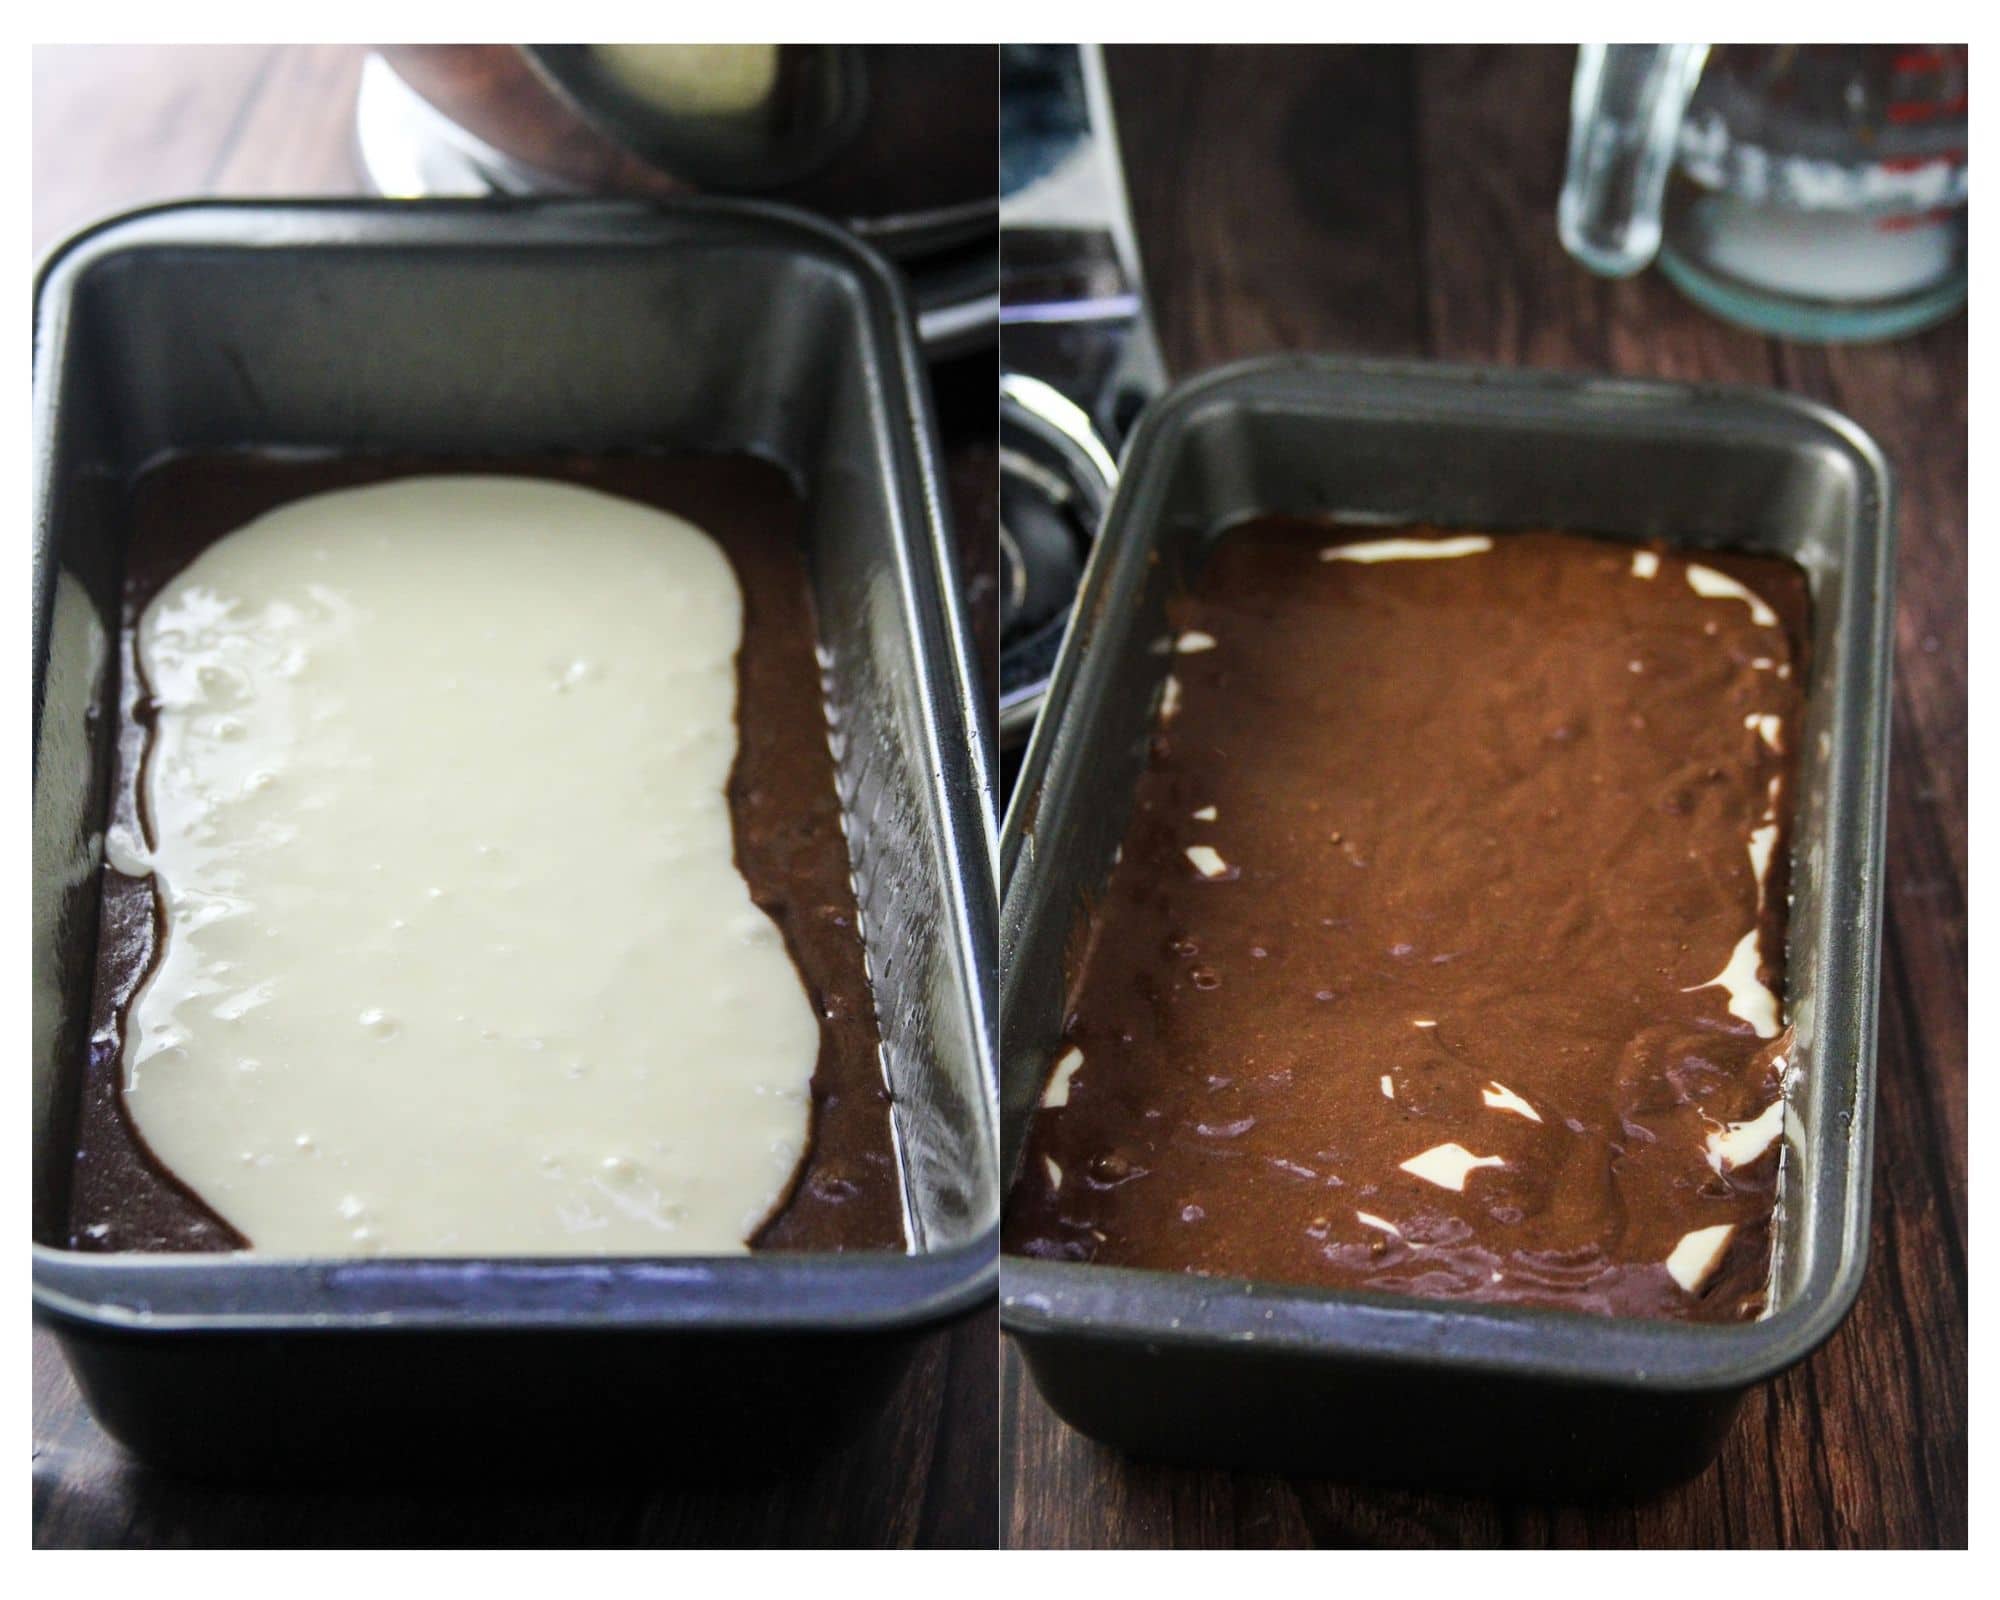 The cream cheese filling, scooped in the center of the chocolate batter, then covered with the rest of the chocolate batter.